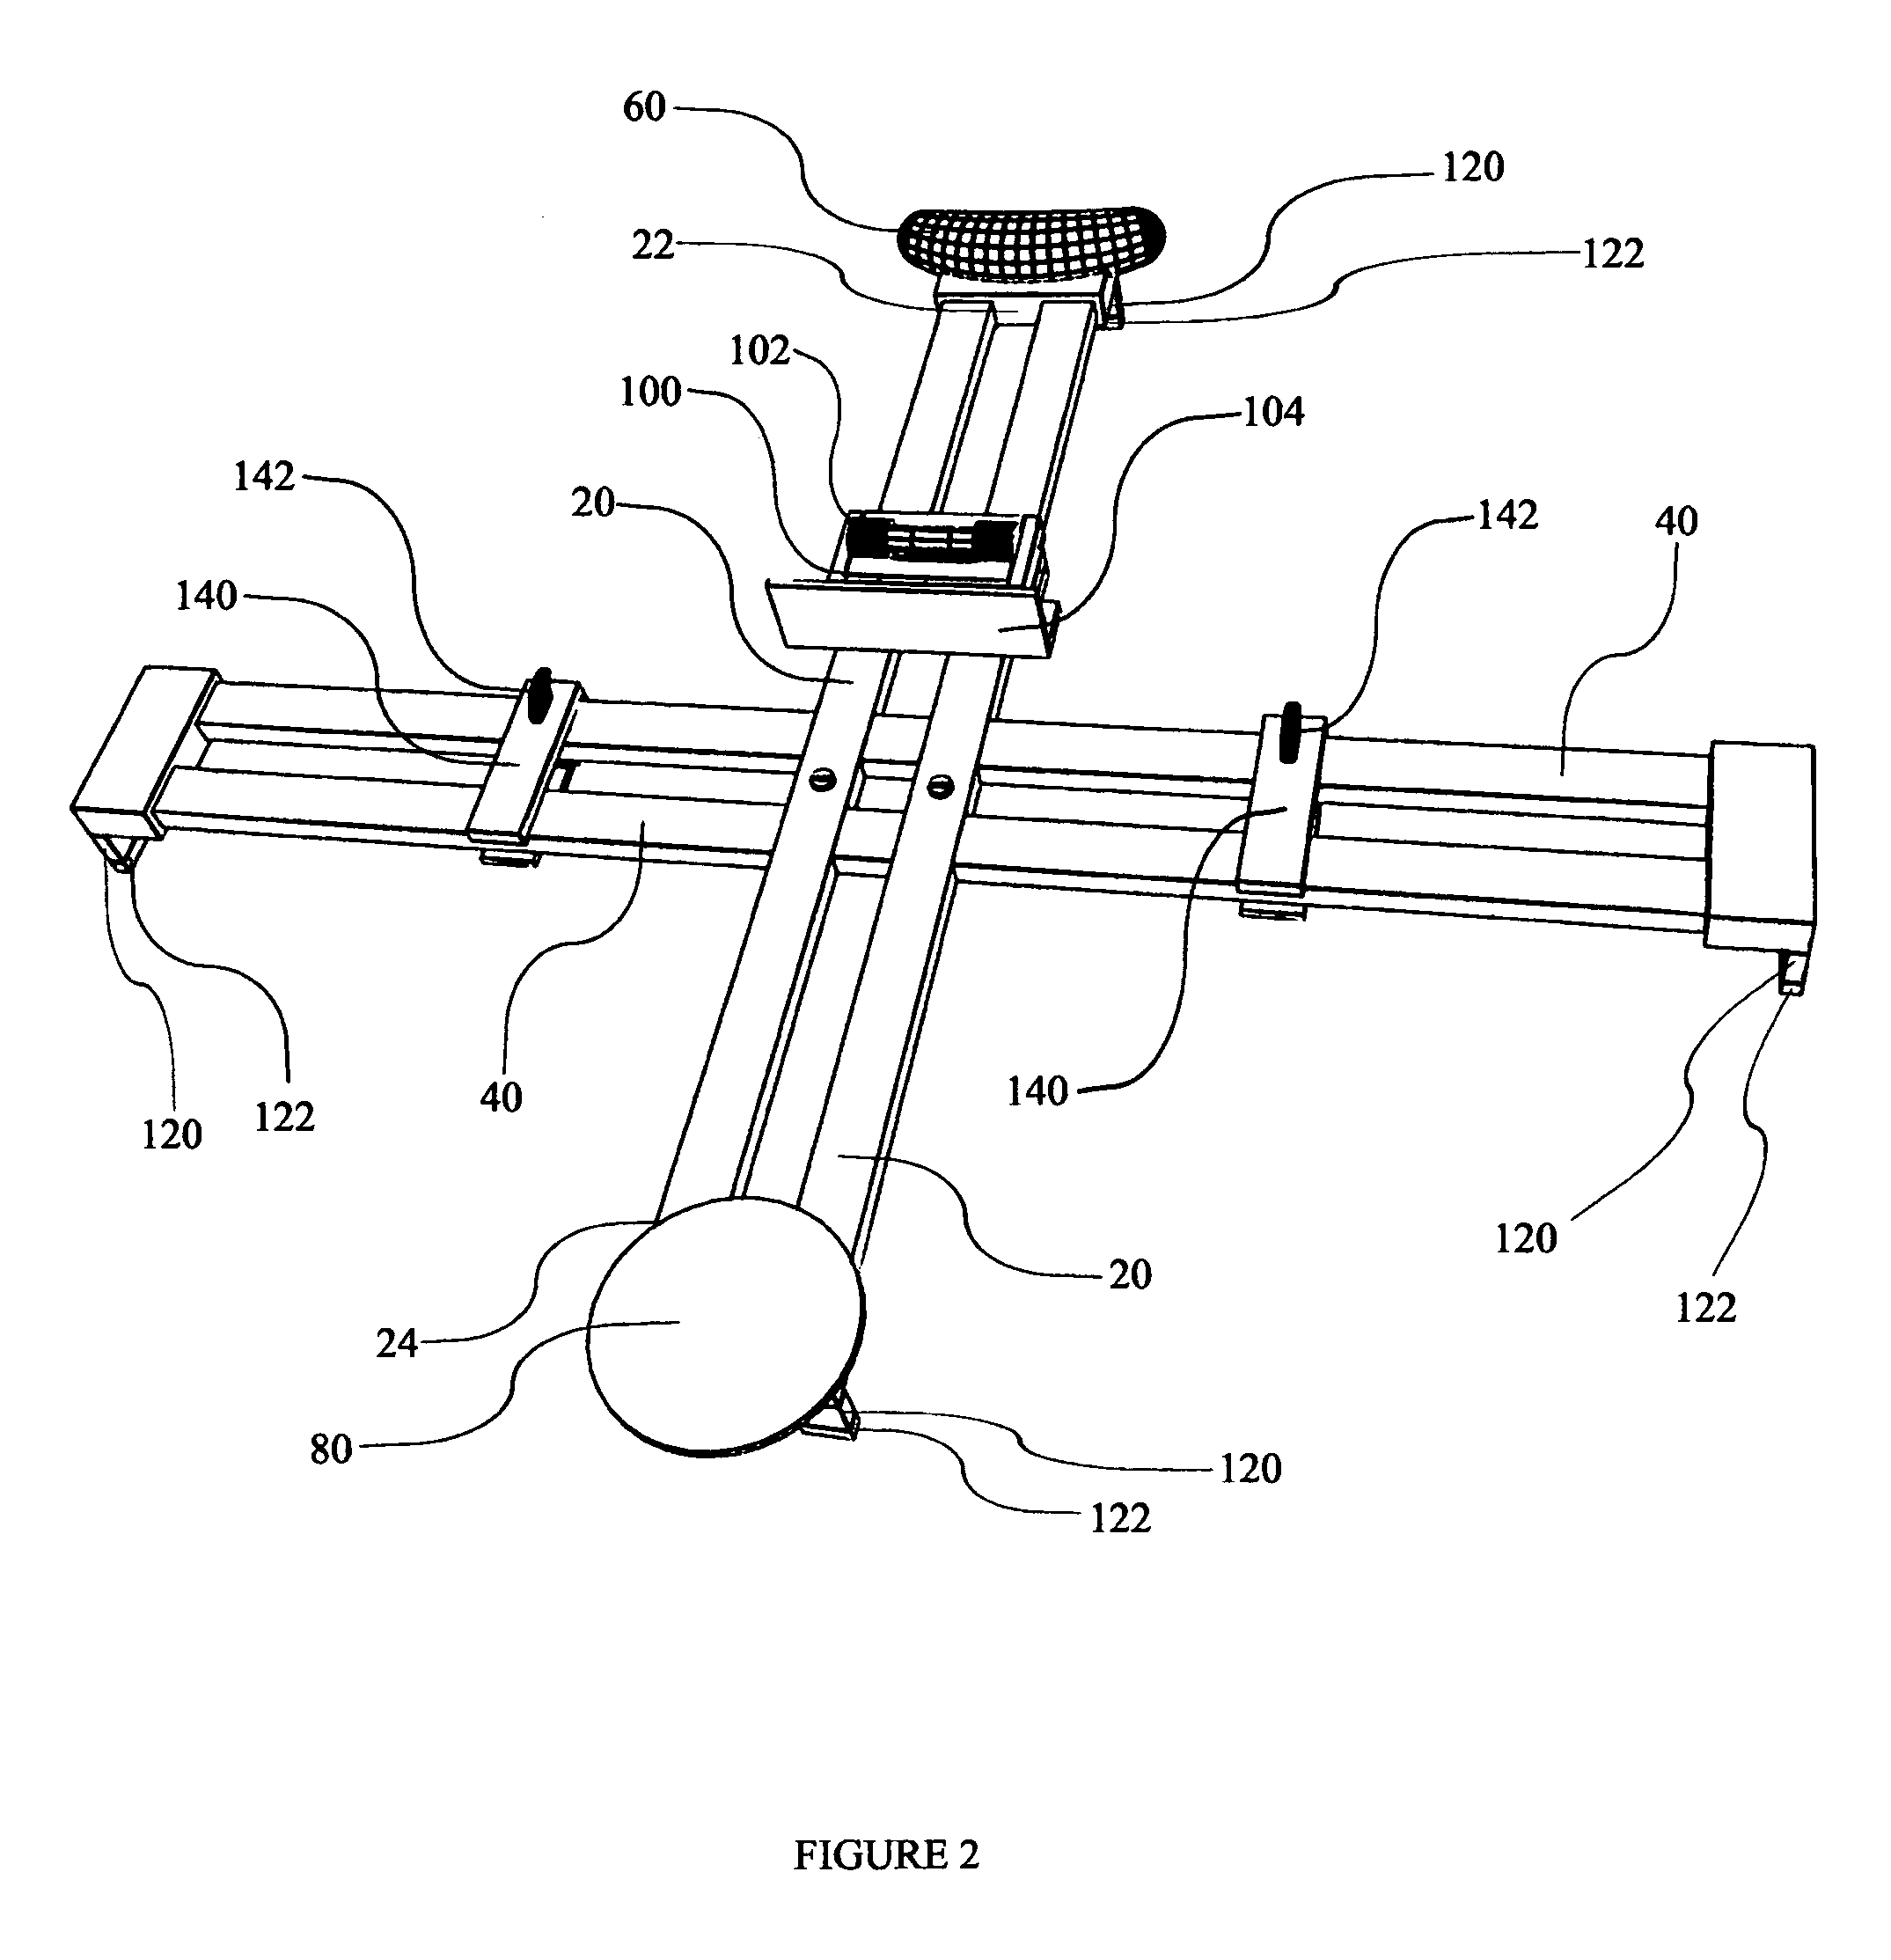 Device for mounting decorative and functional items